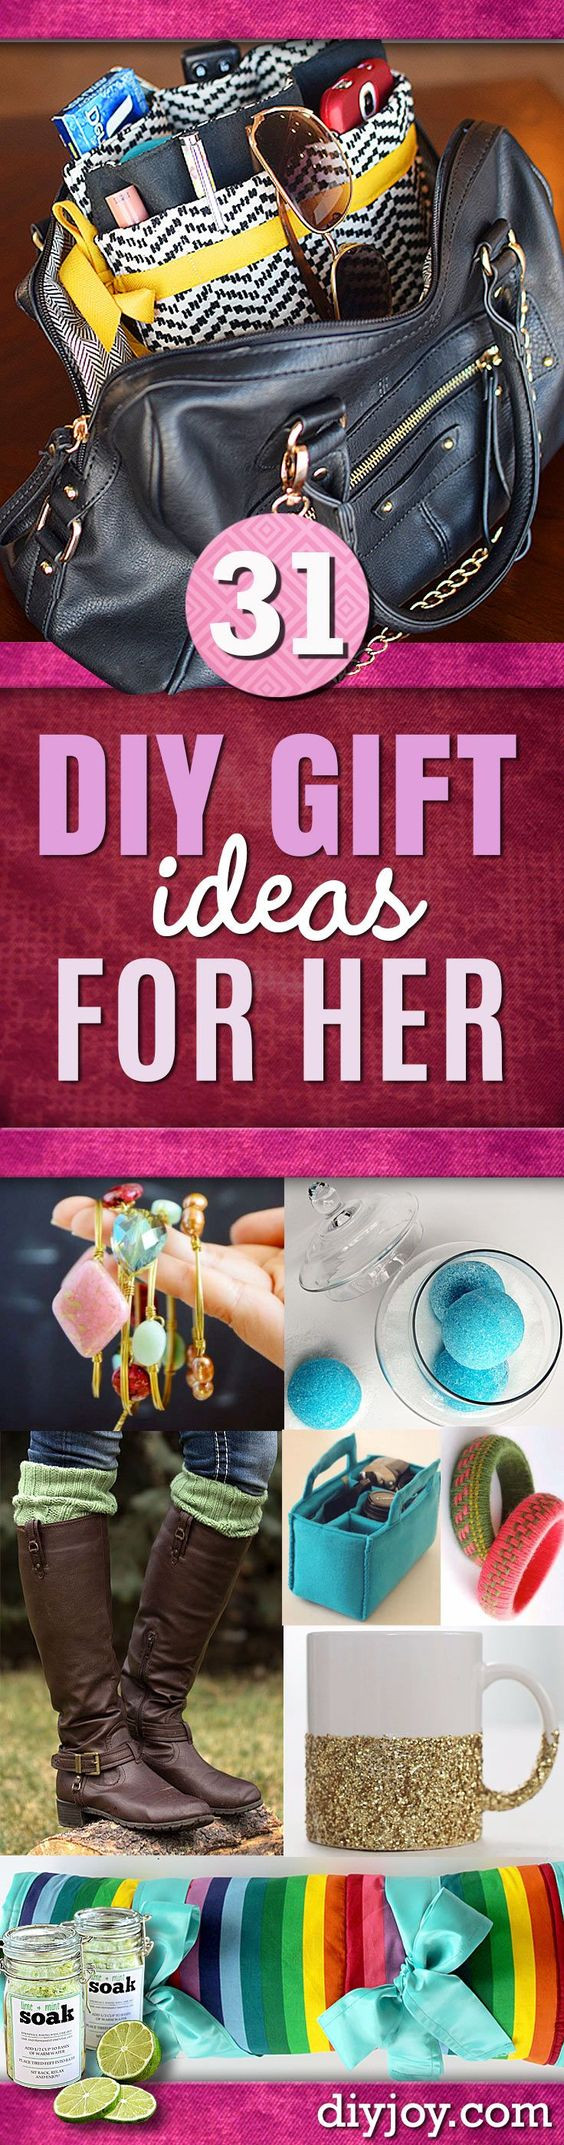 DIY Anniversary Gifts For Her
 Super Special DIY Gift Ideas for Her